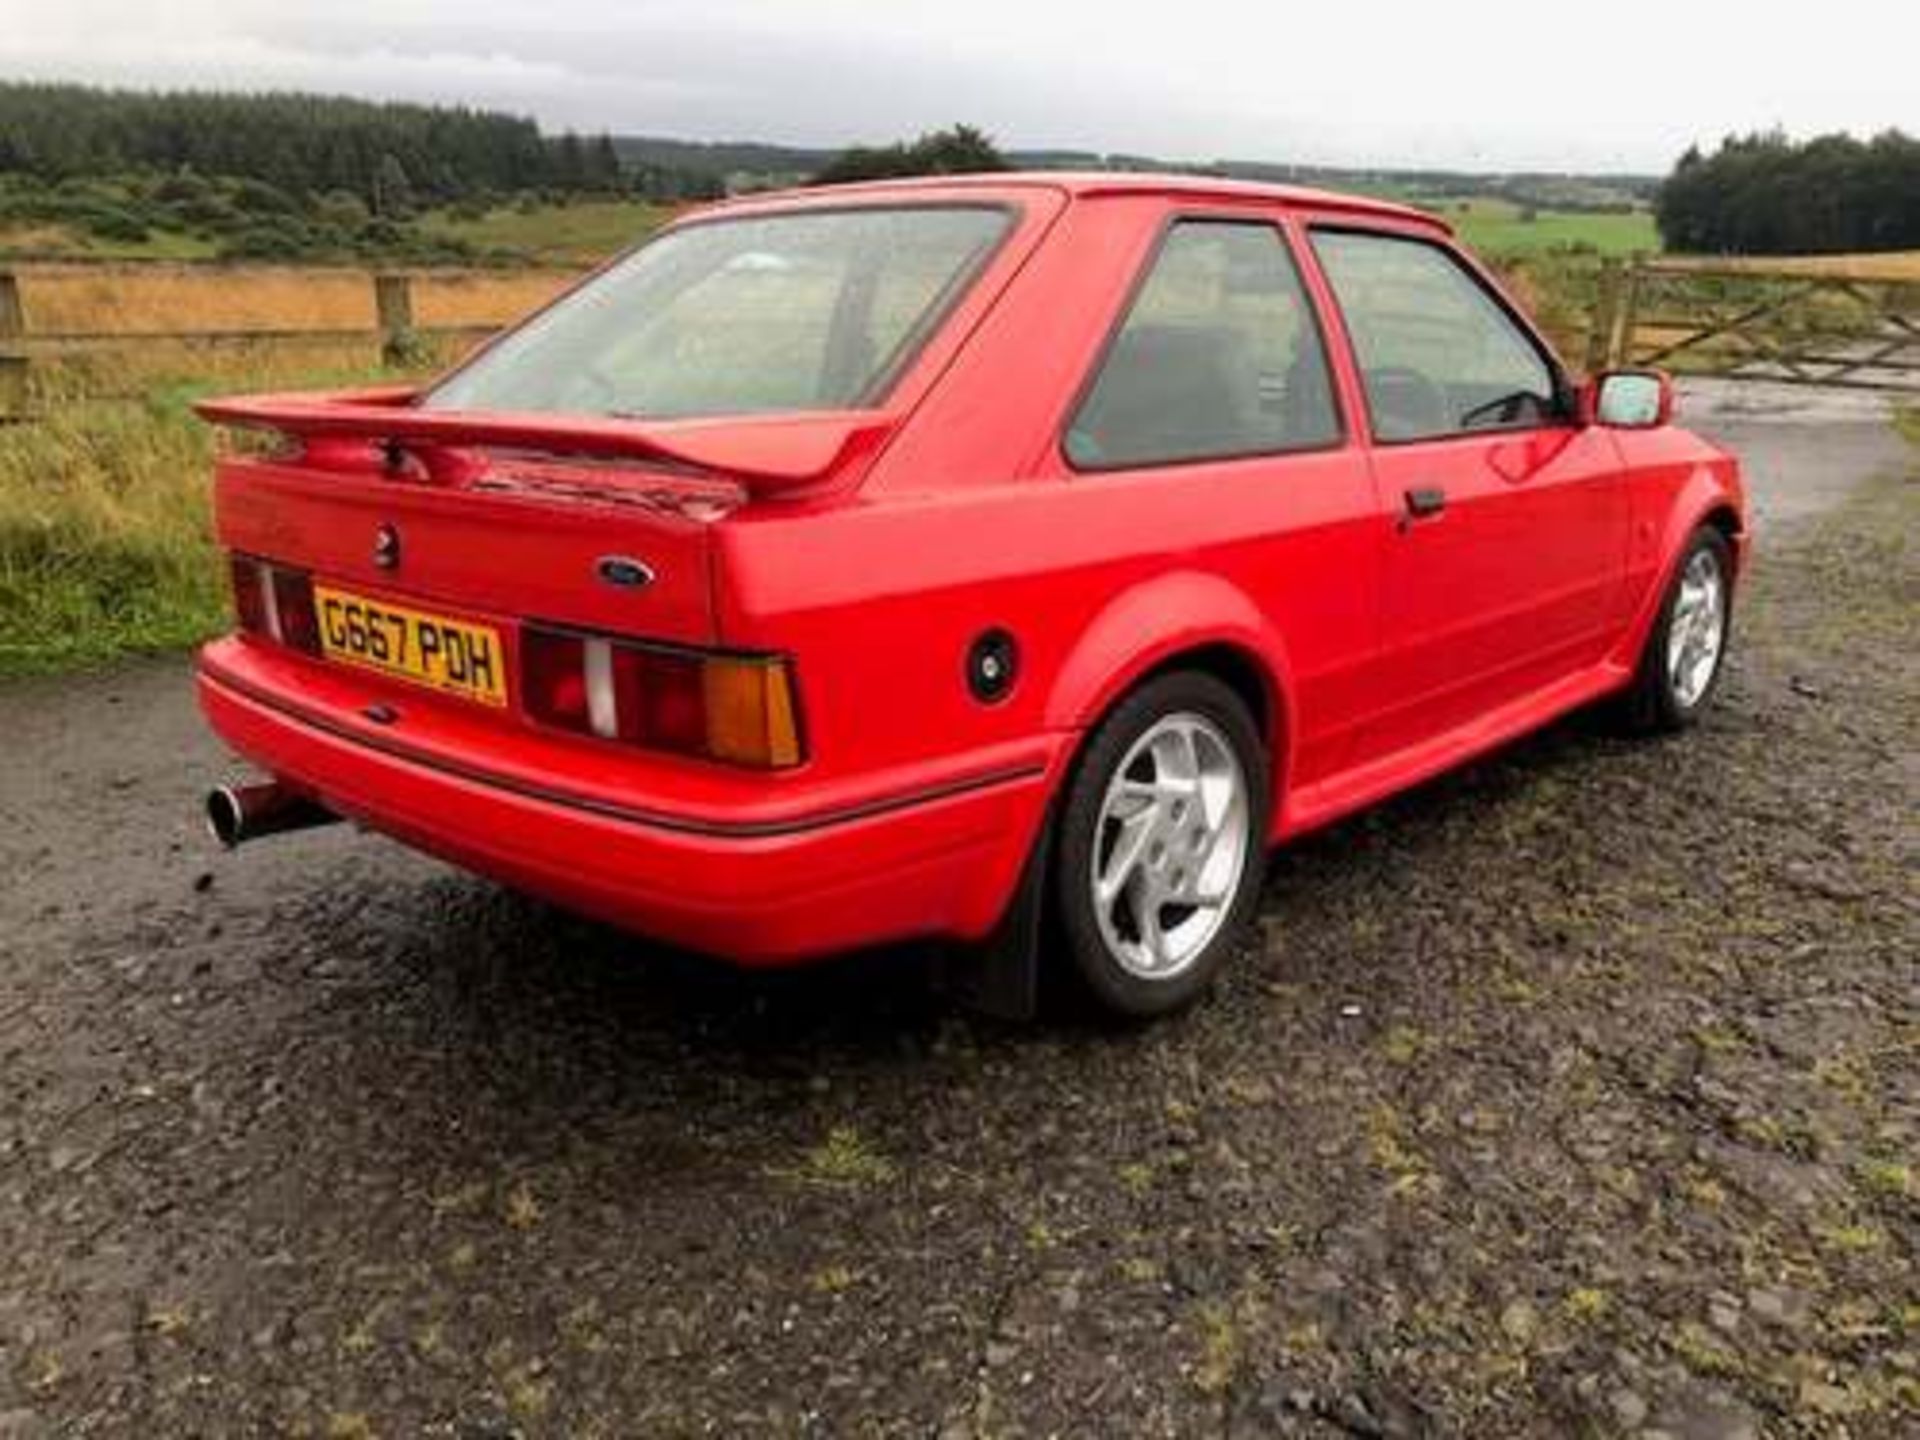 FORD ESCORT RS TURBO - 1597cc - Image 2 of 4